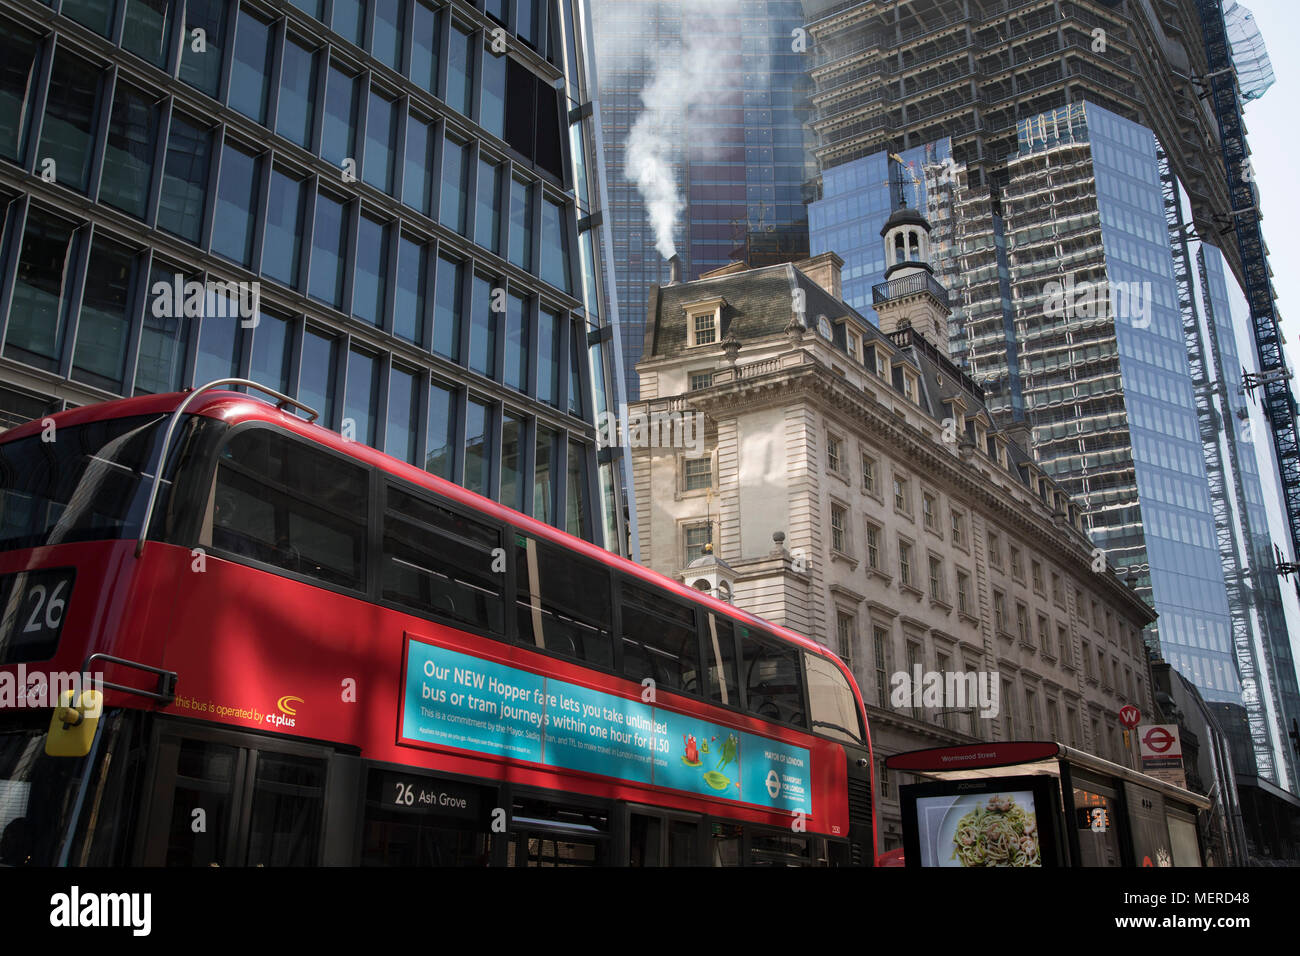 Pollution from the chimney of an old building pours out into the atmosphere amongst modern glass buildings in the City of London, London, England, United Kingdom. At street level, busses and traffic passes adding to the emissions, and all adding up to the poor air quality which people are breathing on a daily basis. London is trying to achieve air quality targets. The European Air Quality Index, run by the European Environment Agency EEA and the European Commission, allows users to check the current air quality across Europe’s cities and regions. Environmental groups called for the Government  Stock Photo